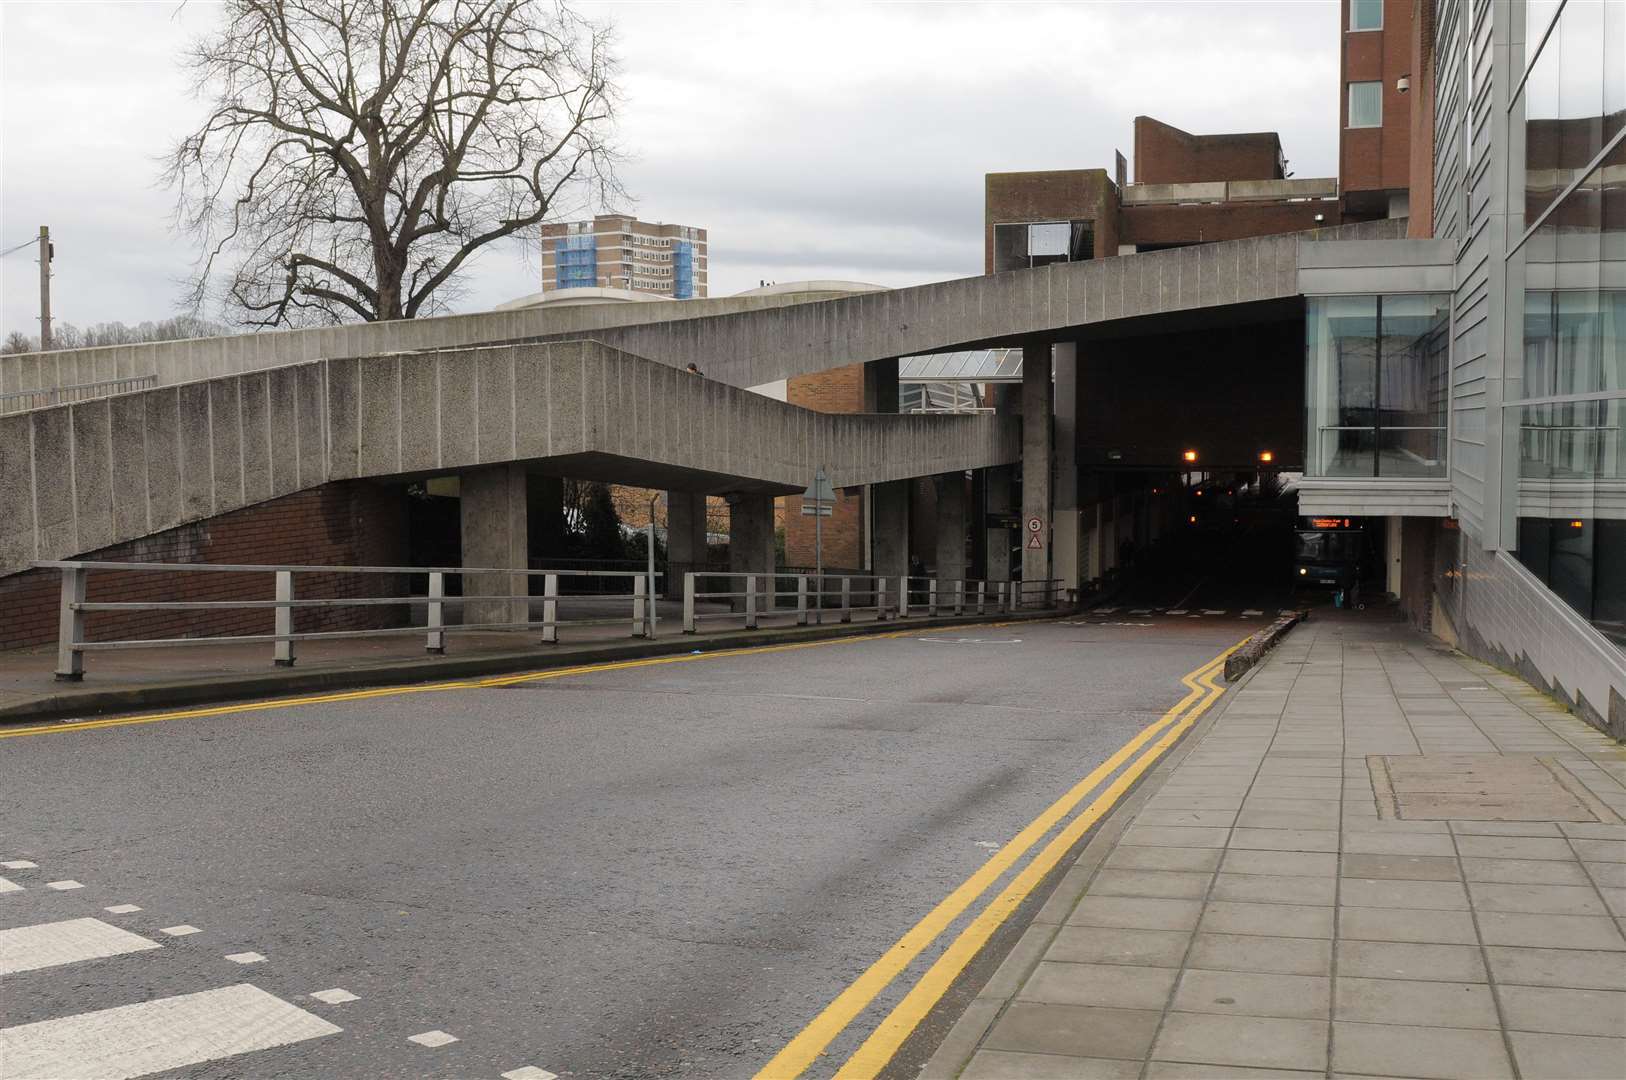 The bus station - unchanged 13 years on